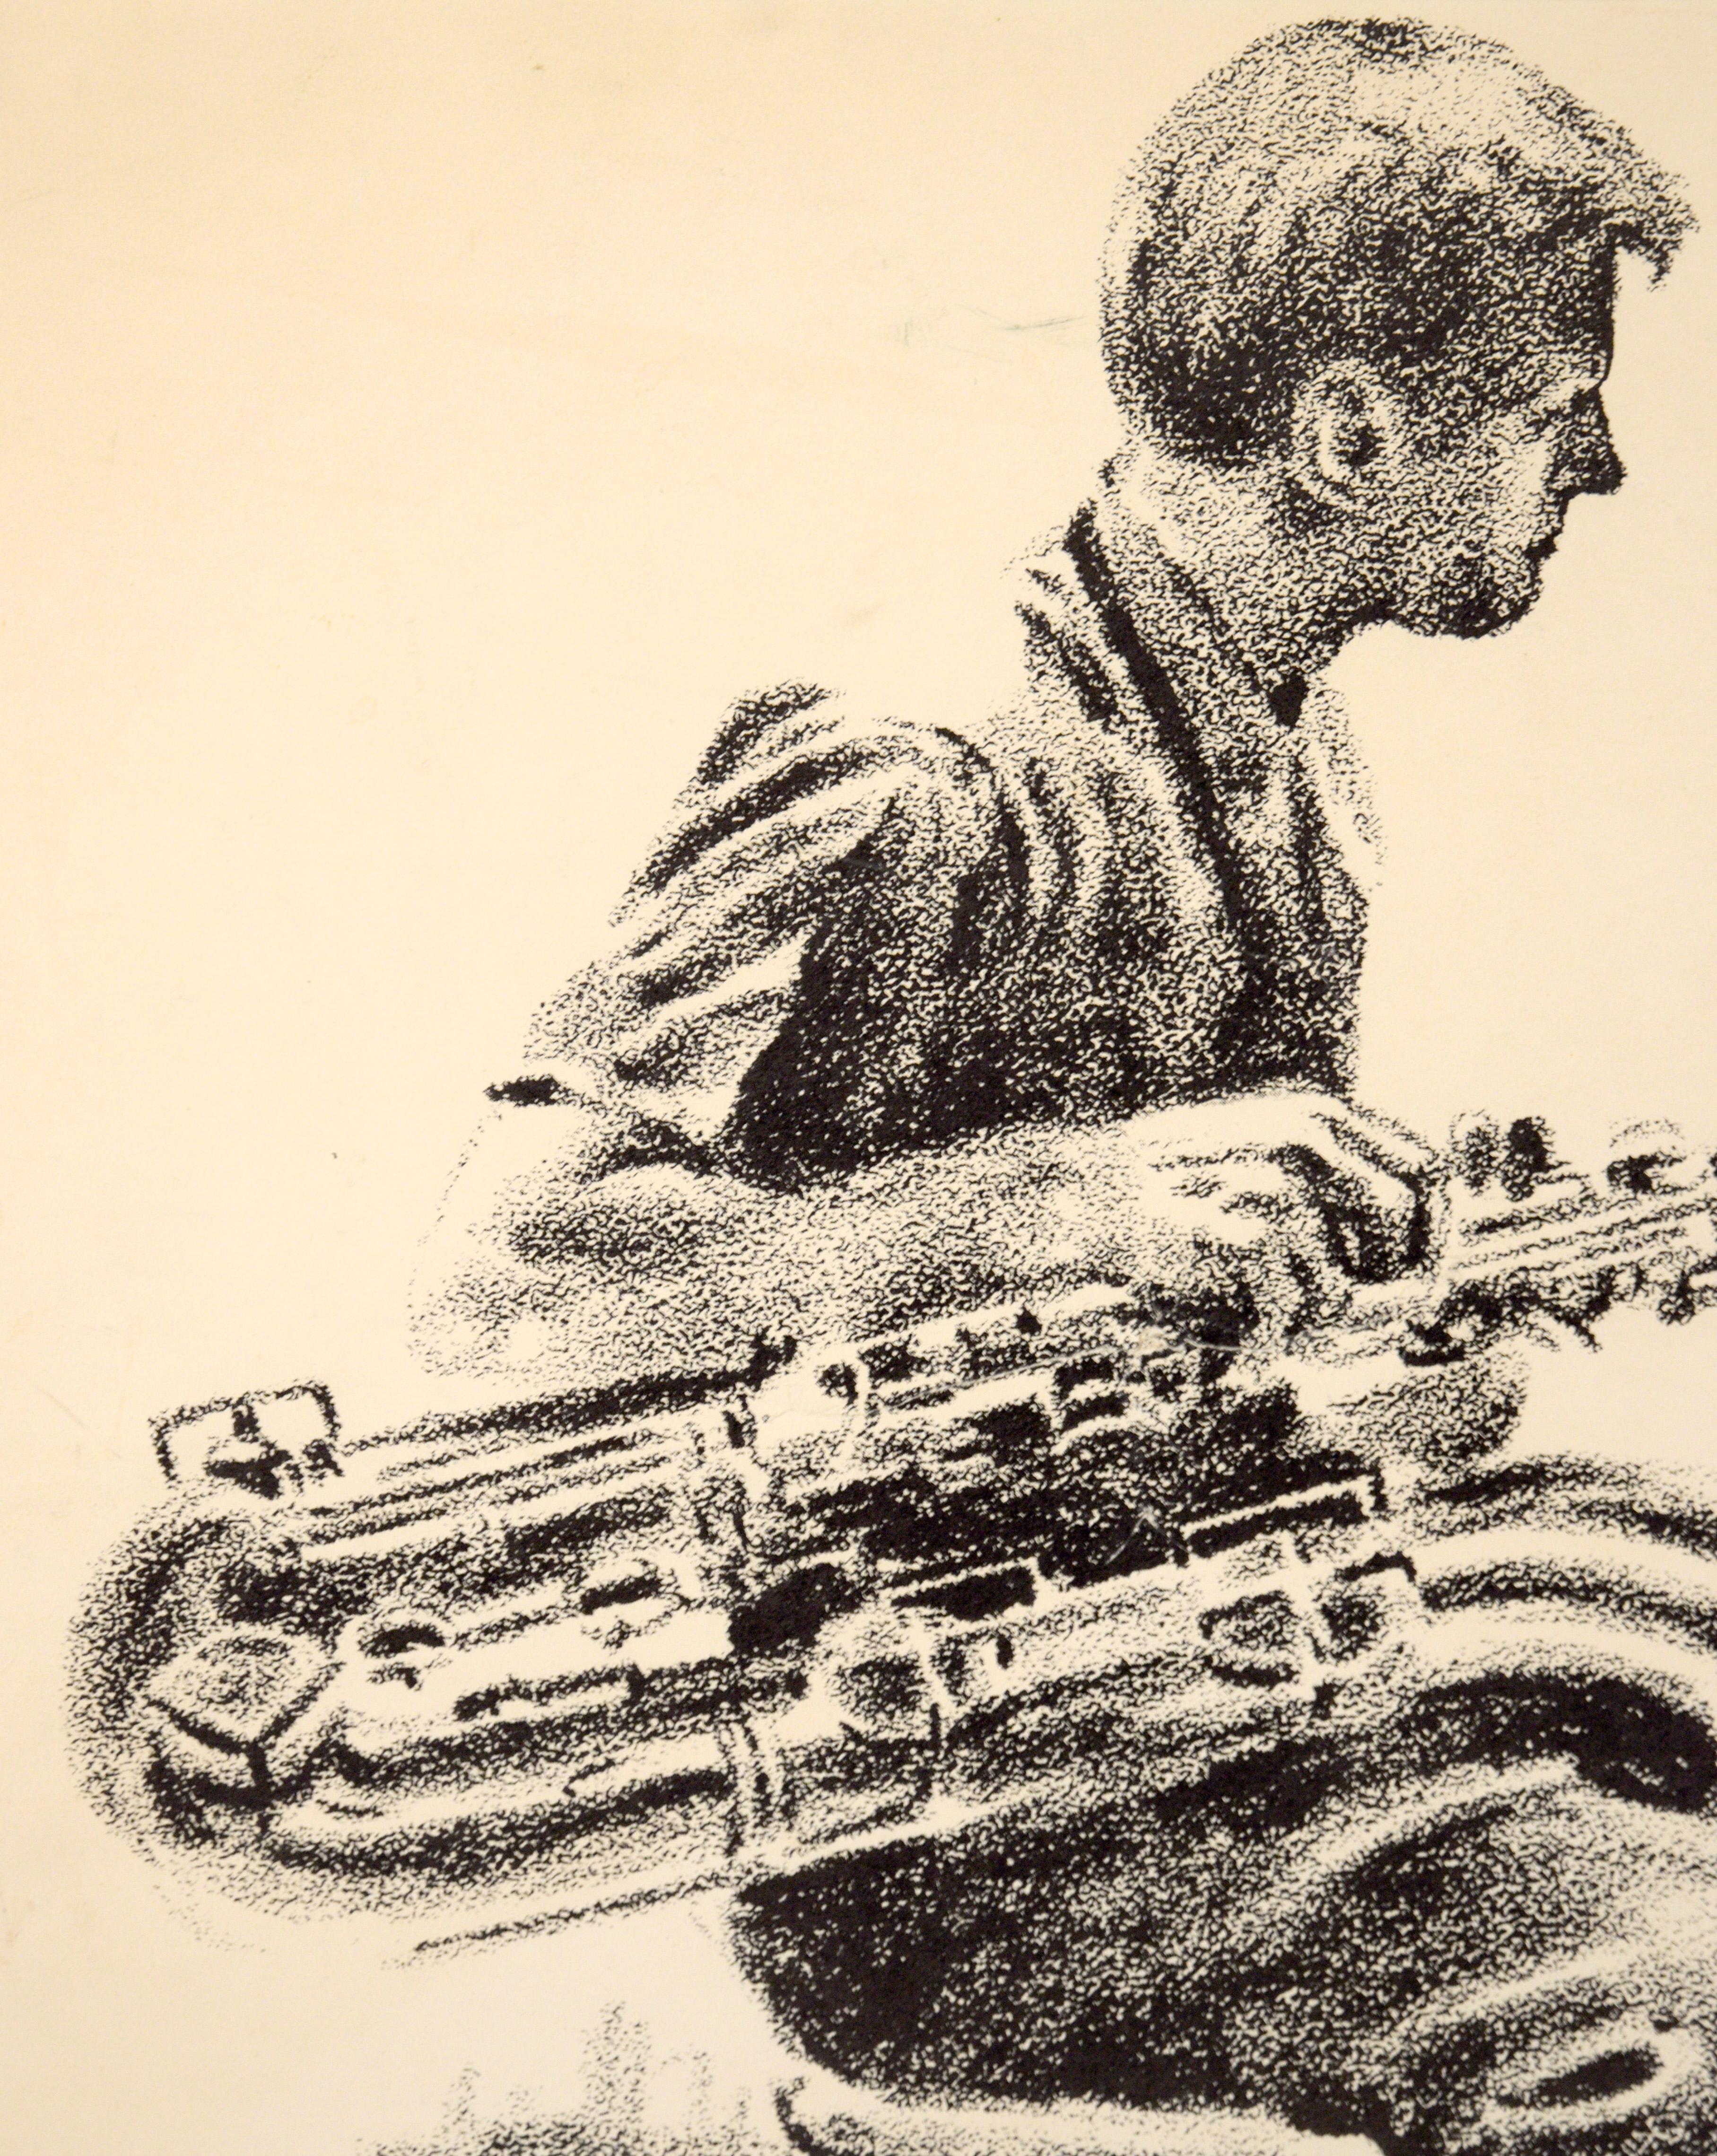 Gerry Mulligan, Baritone Sax - Rare Signed Figurative Lithograph in Ink on Paper - Print by Eugene Hawkins